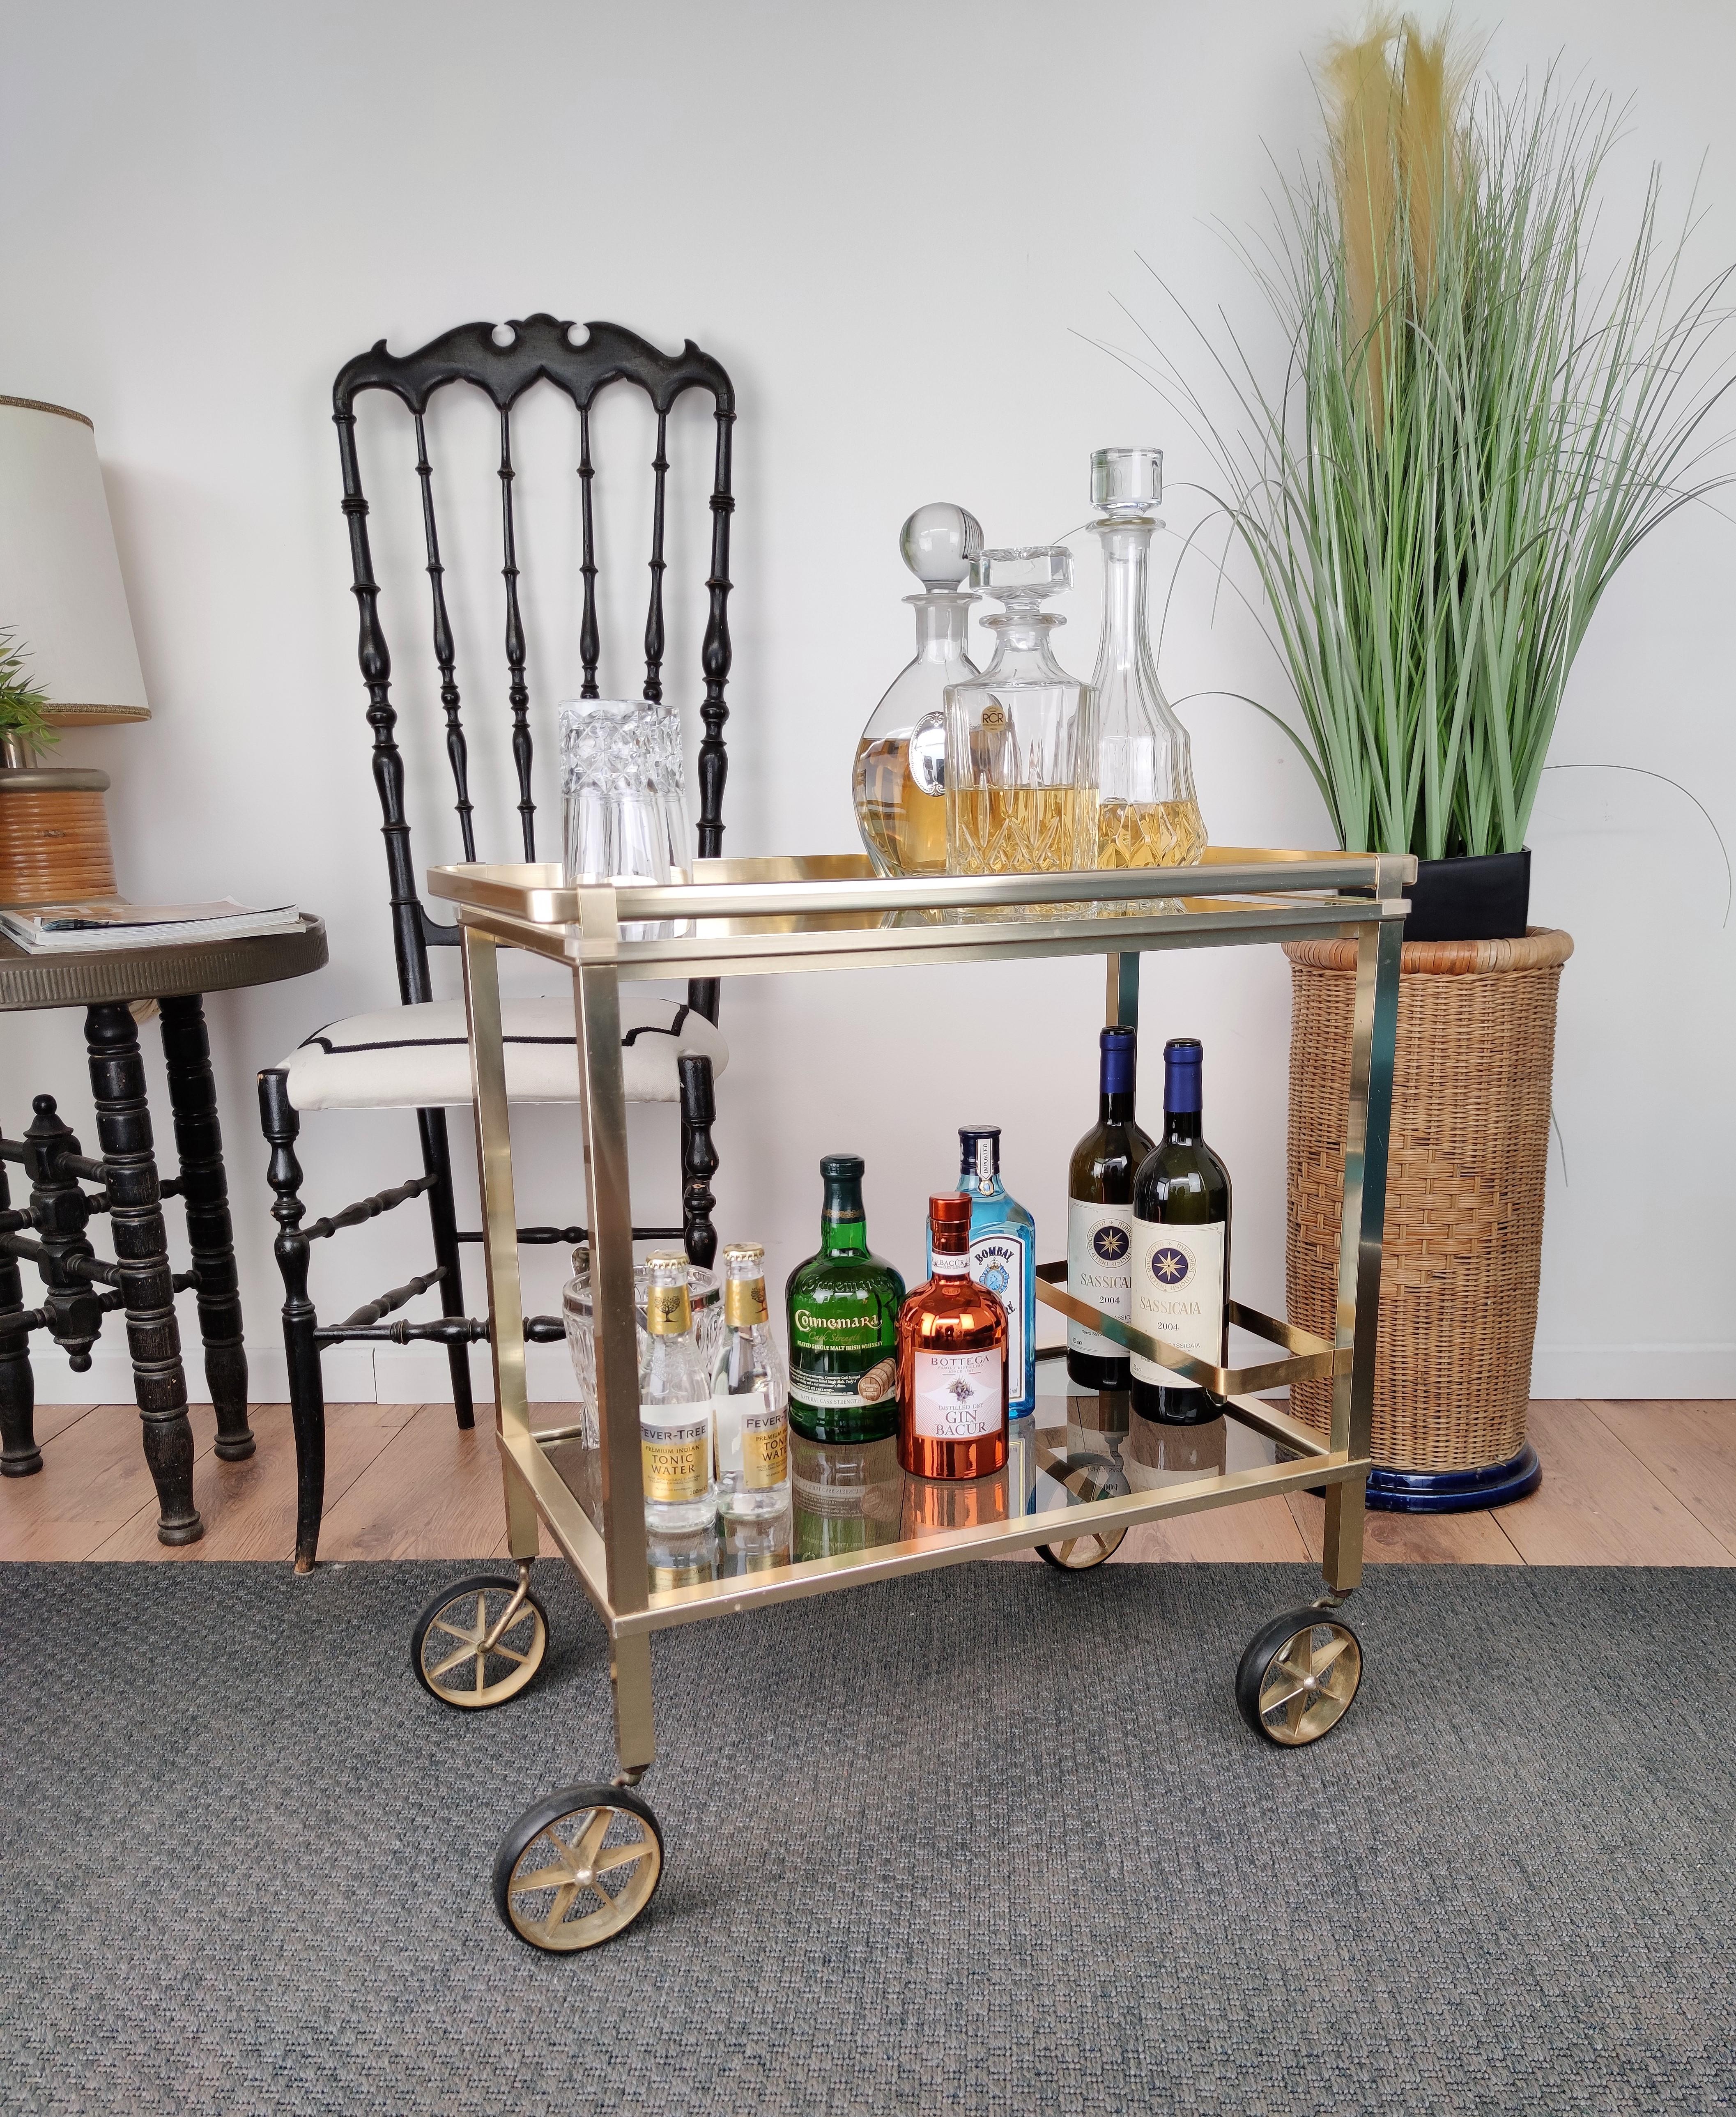 Beautiful and stylish vintage 1970s Italian two-tier brass and glass bar cart with removable top tray and frame for bottle holder. Very good condition.

A great piece that perfectly adds to every home decor the typical glitz, glamour and gold of